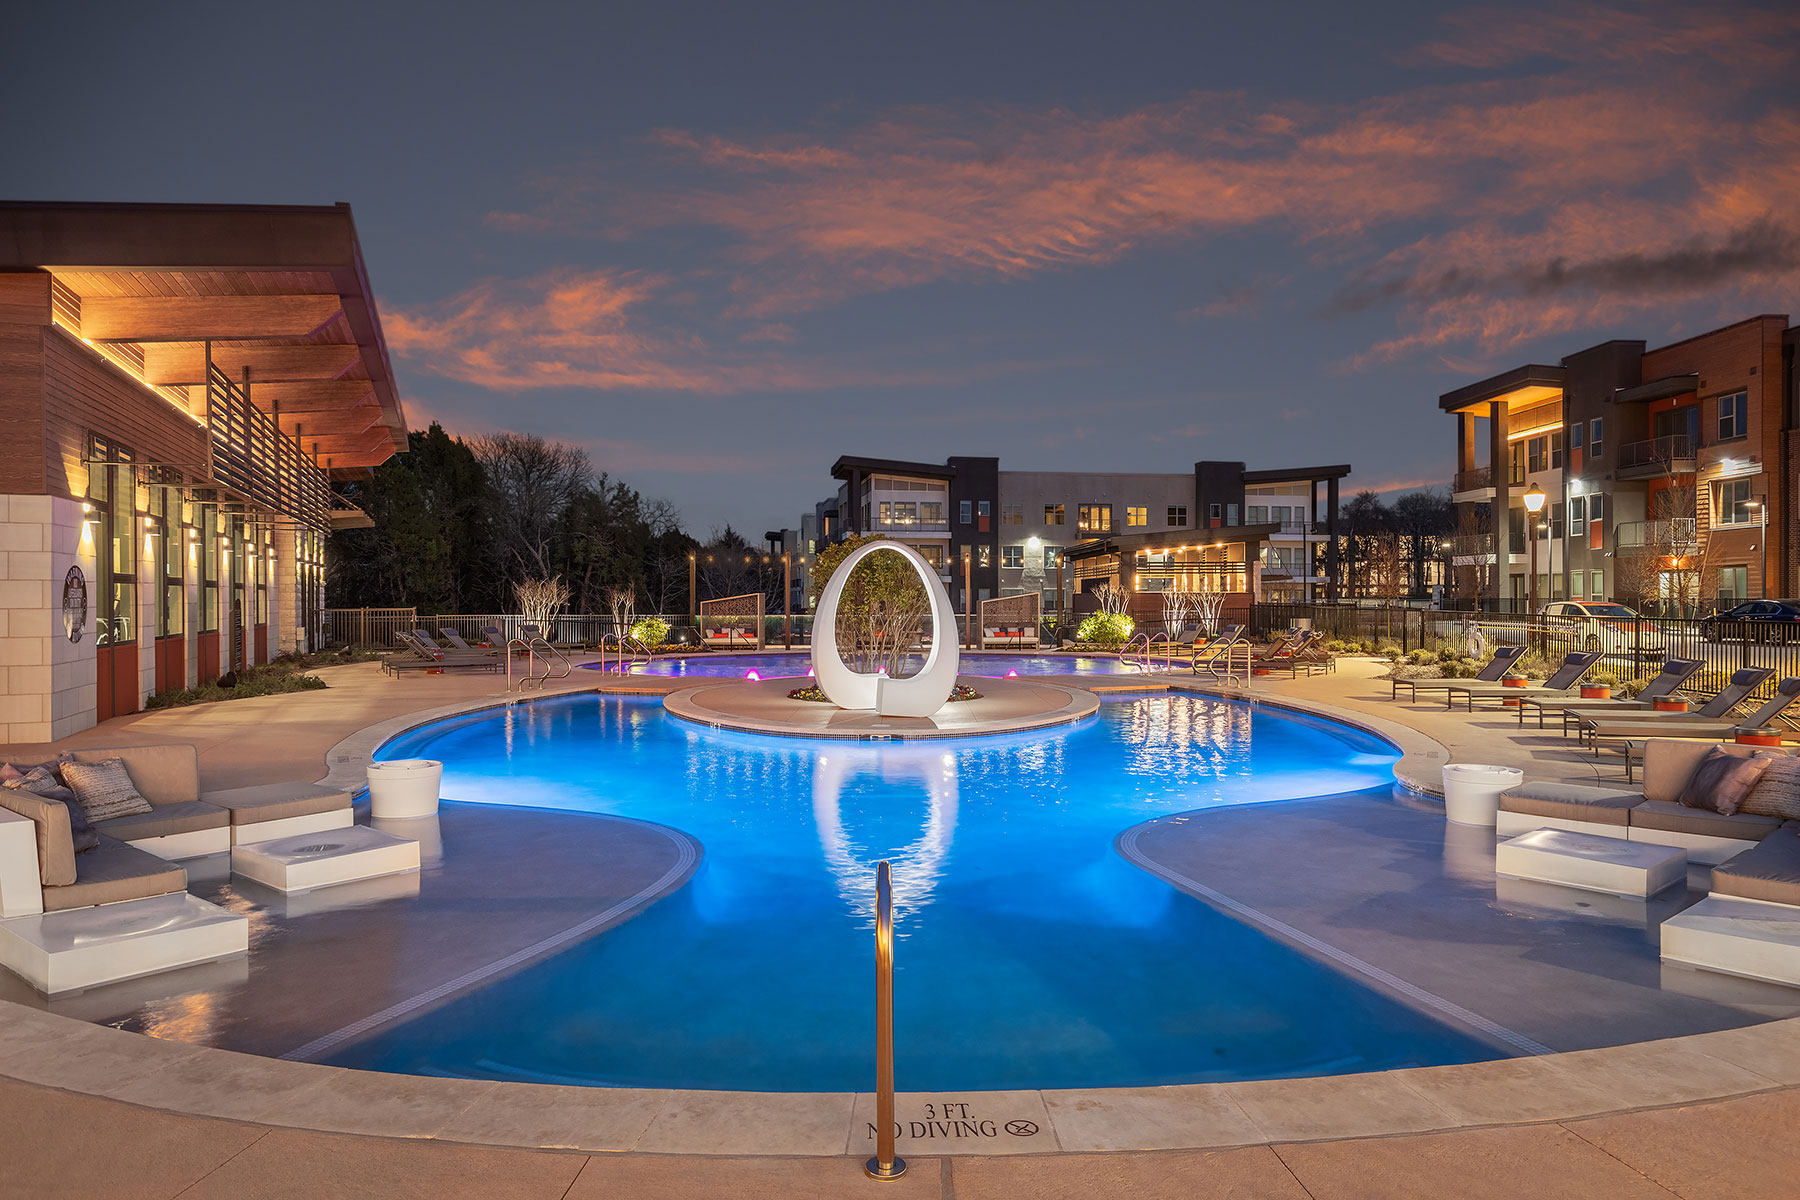 Night time pool shot with oval architecture sculpture, lounge seating, and lighted buildings in the background.